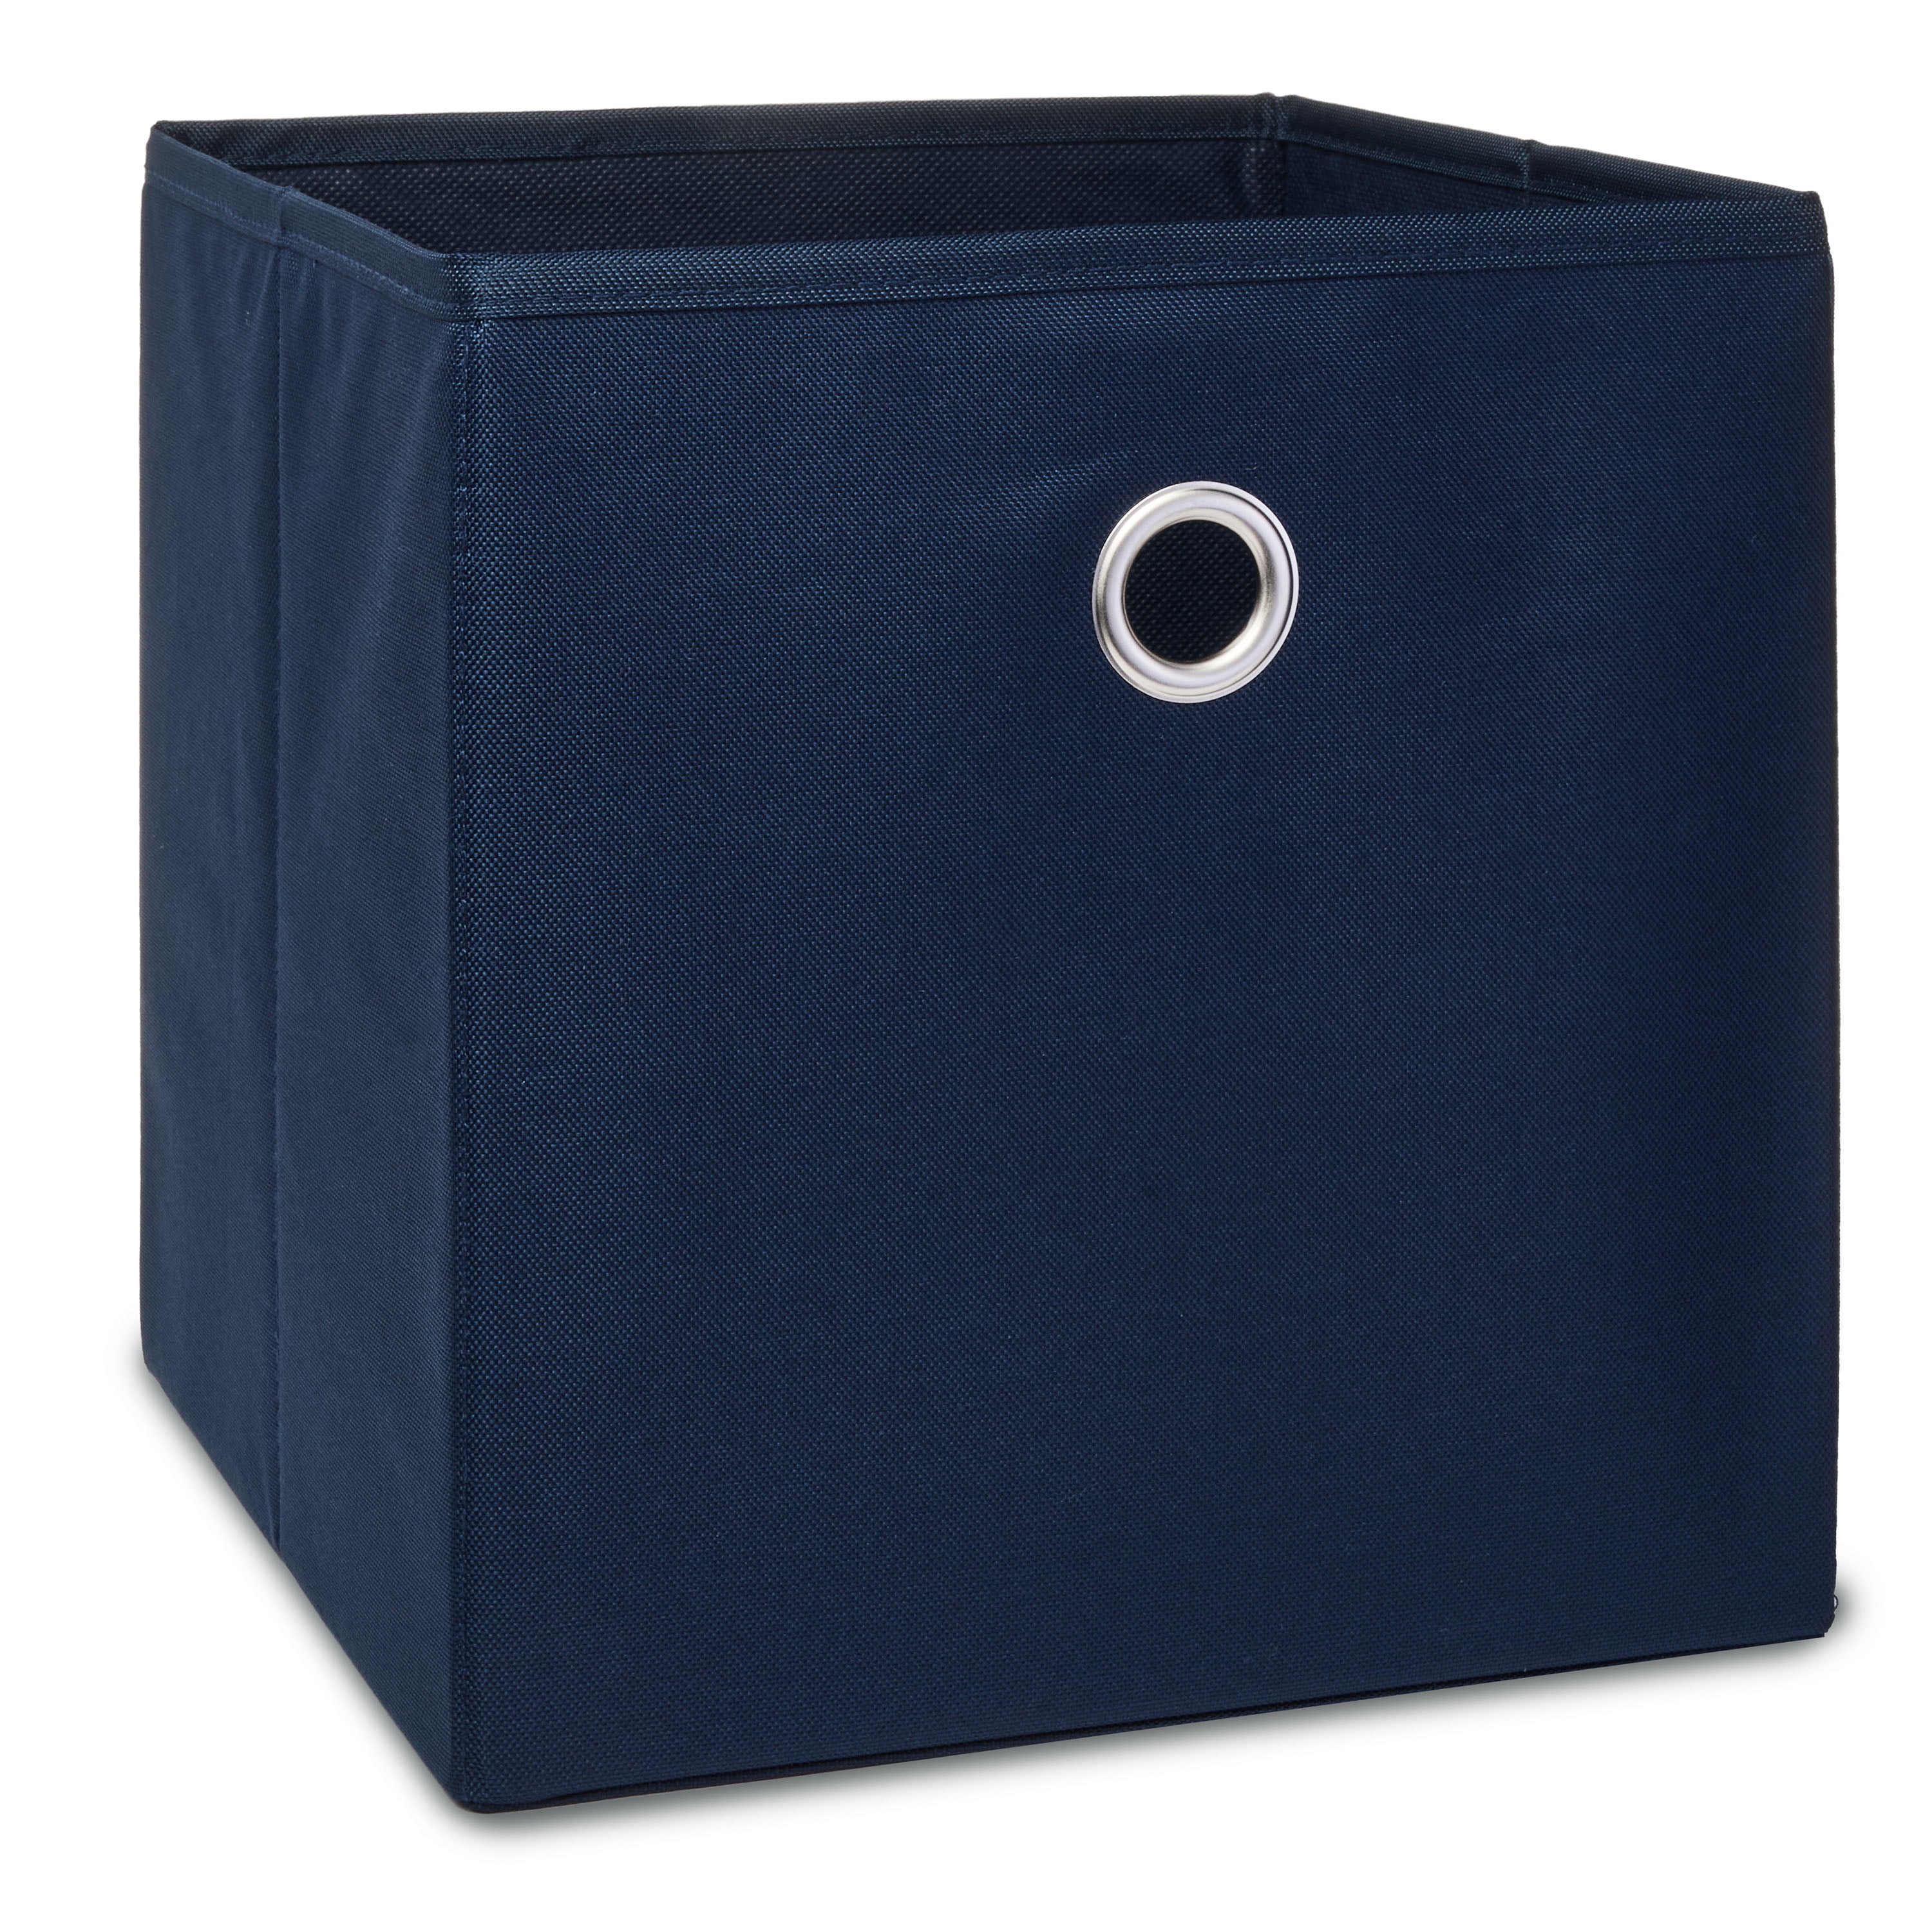 New in Package Mainstays Half-Size Collapsible Storage Bins Blue Set Of 2 